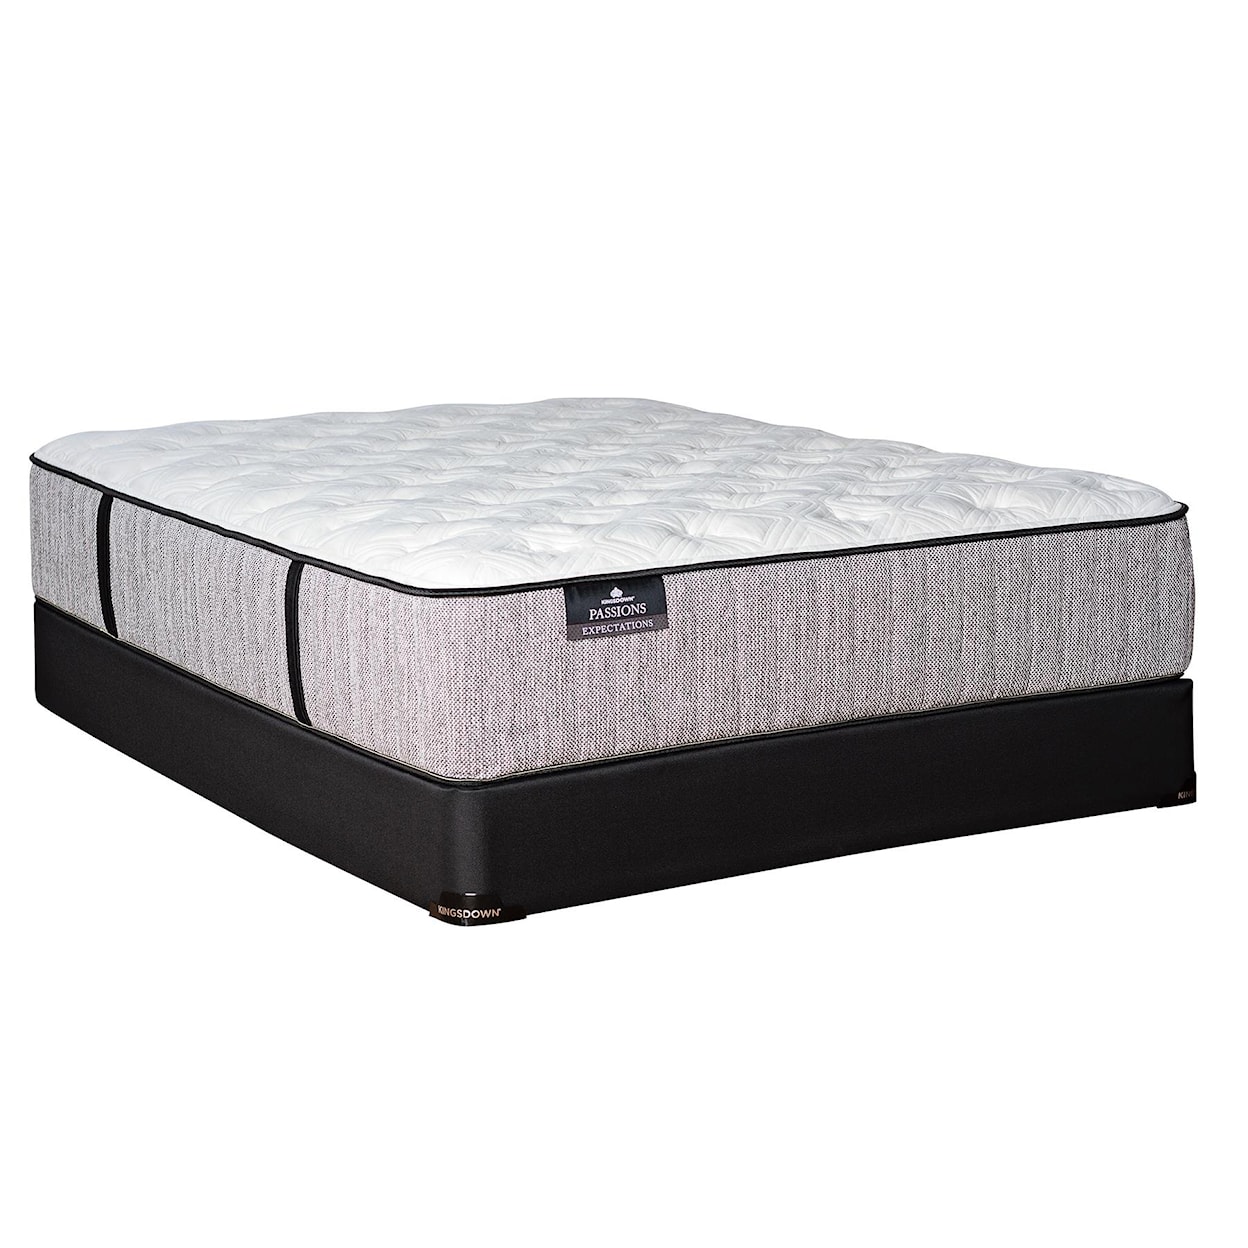 Kingsdown Passions Expectations King Plush Mattress Set with Gel Memory Foam